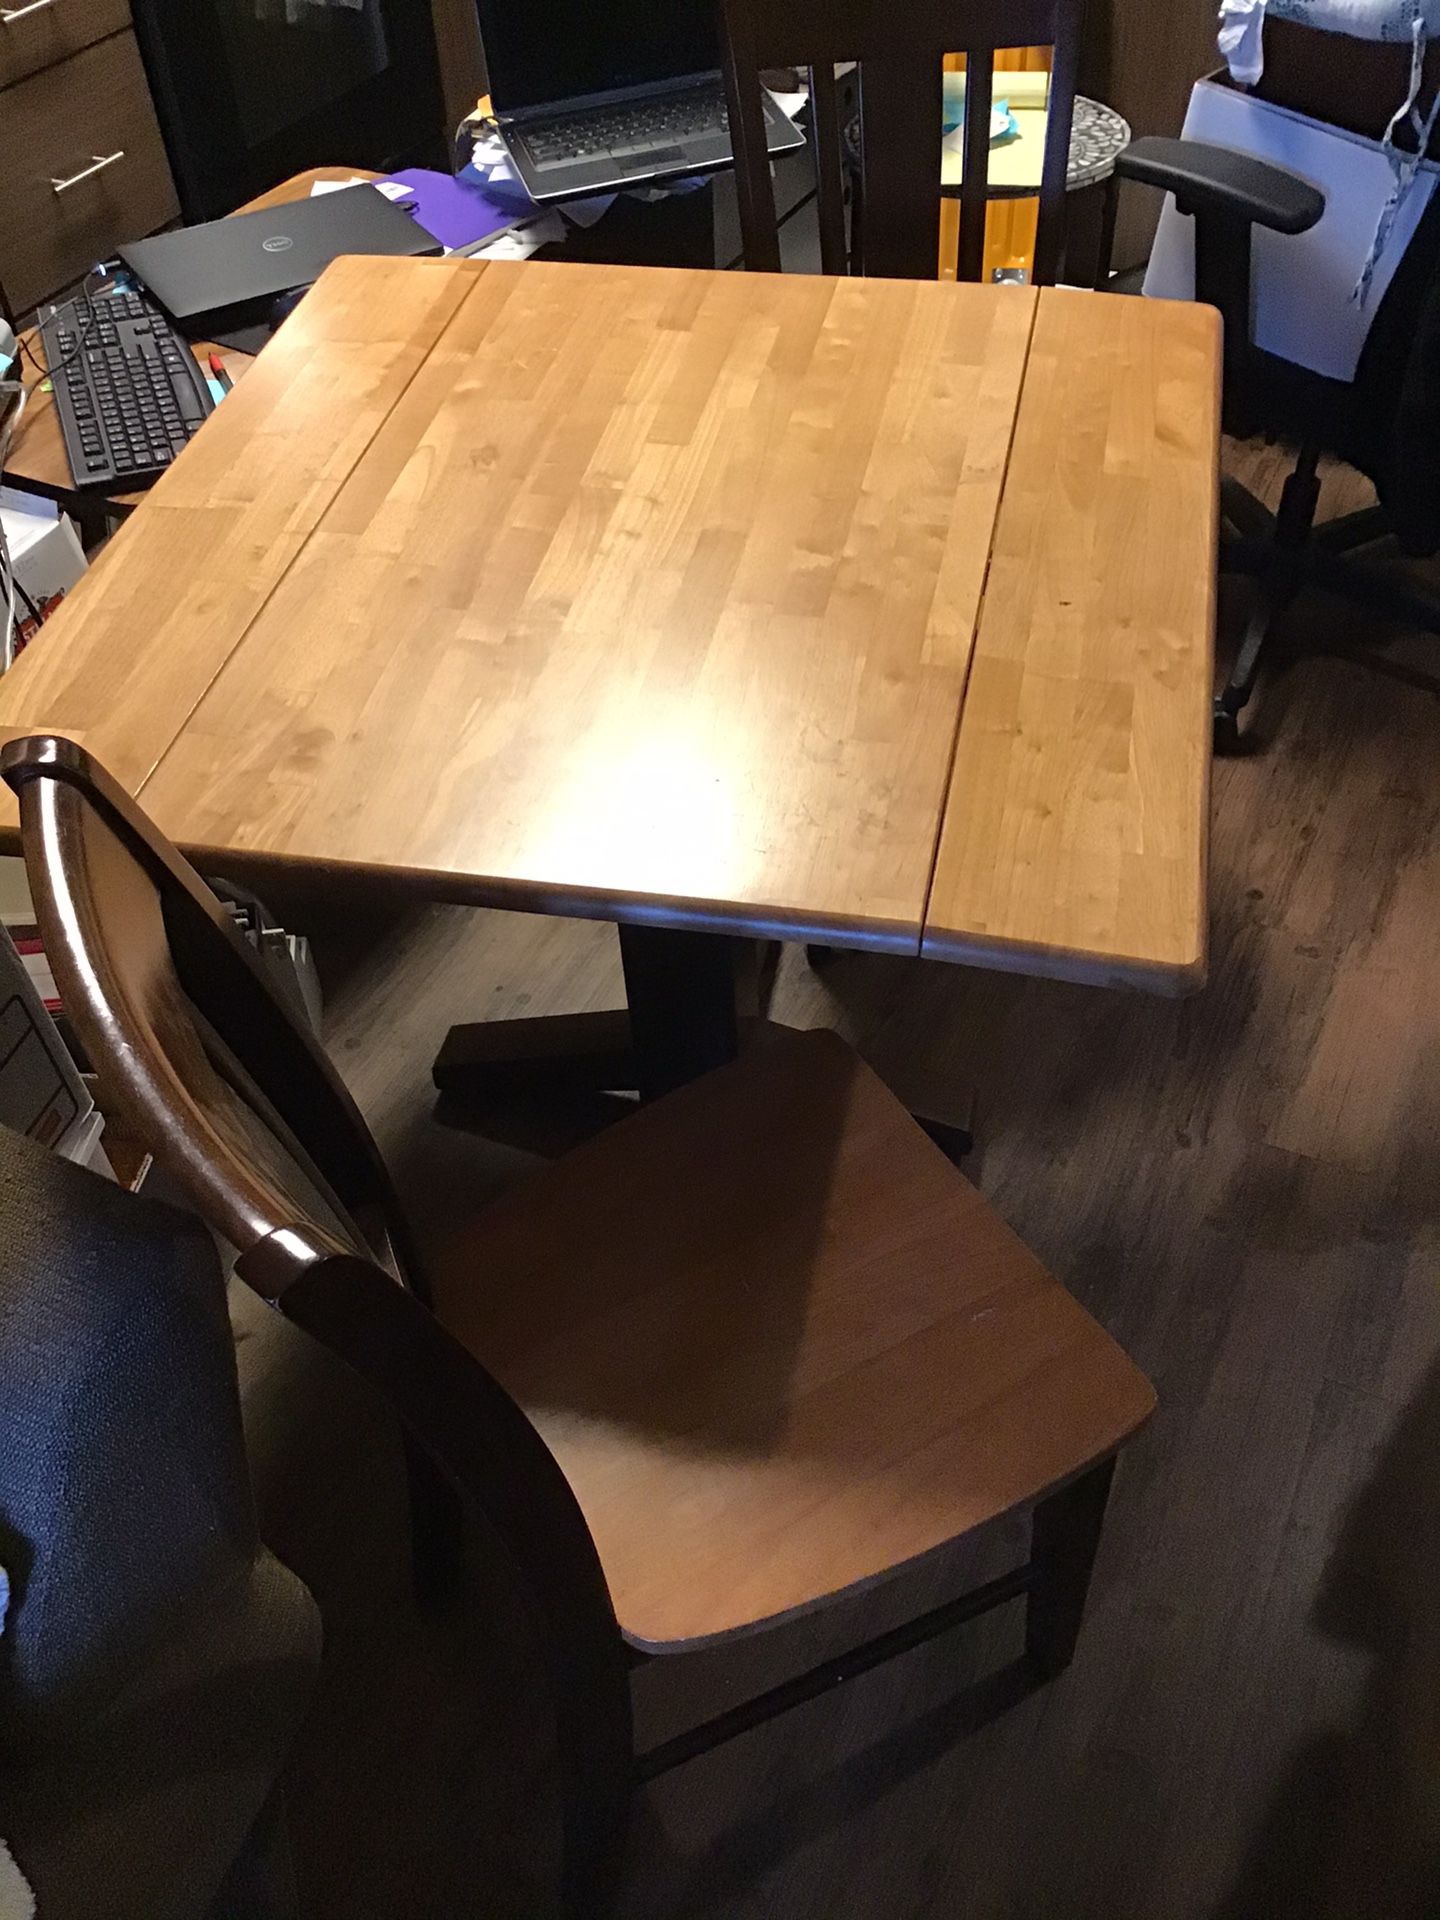 Small kitchen table and two chairs. Wood